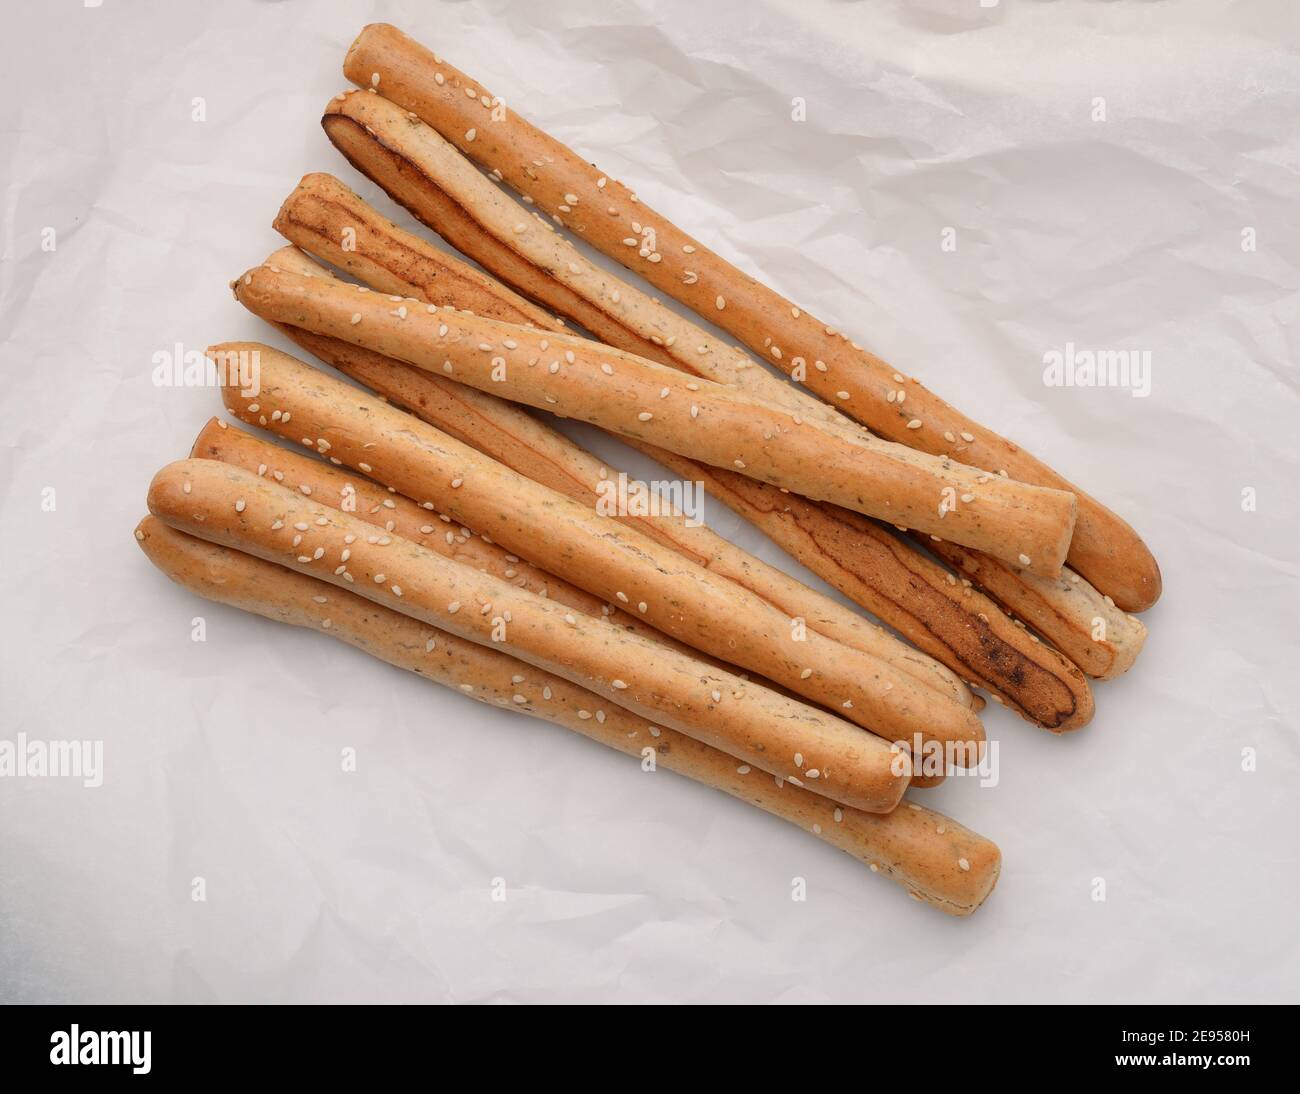 Top view of italian grissini Alamy Stock breadsticks baking on paper - Photo